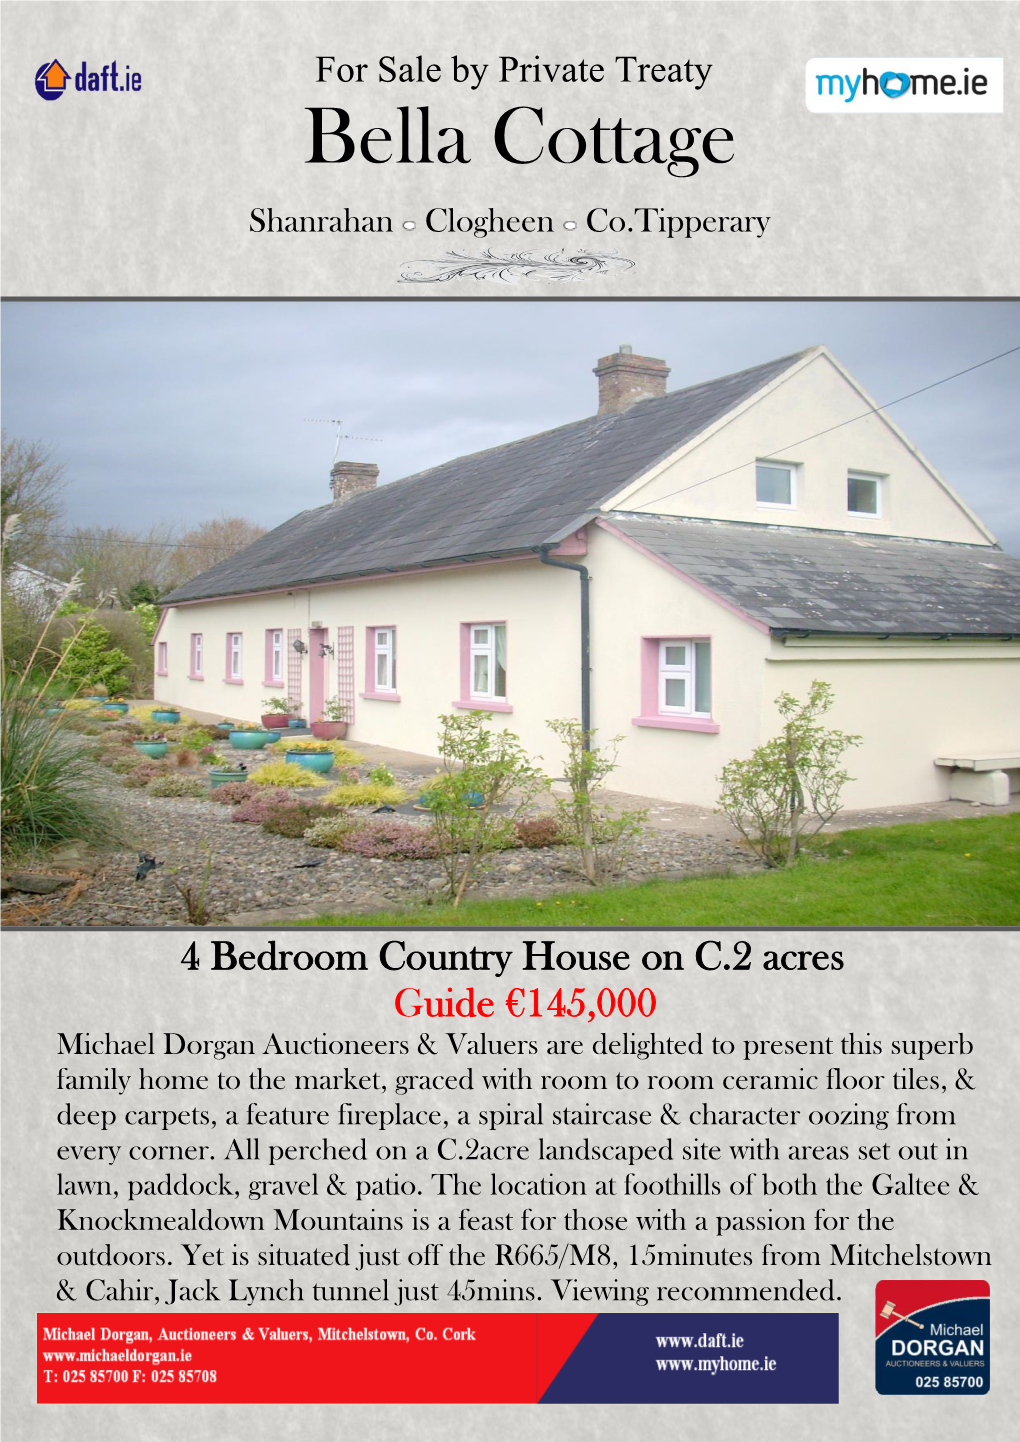 Bella Cottage Shanrahan Clogheen Co.Tipperary